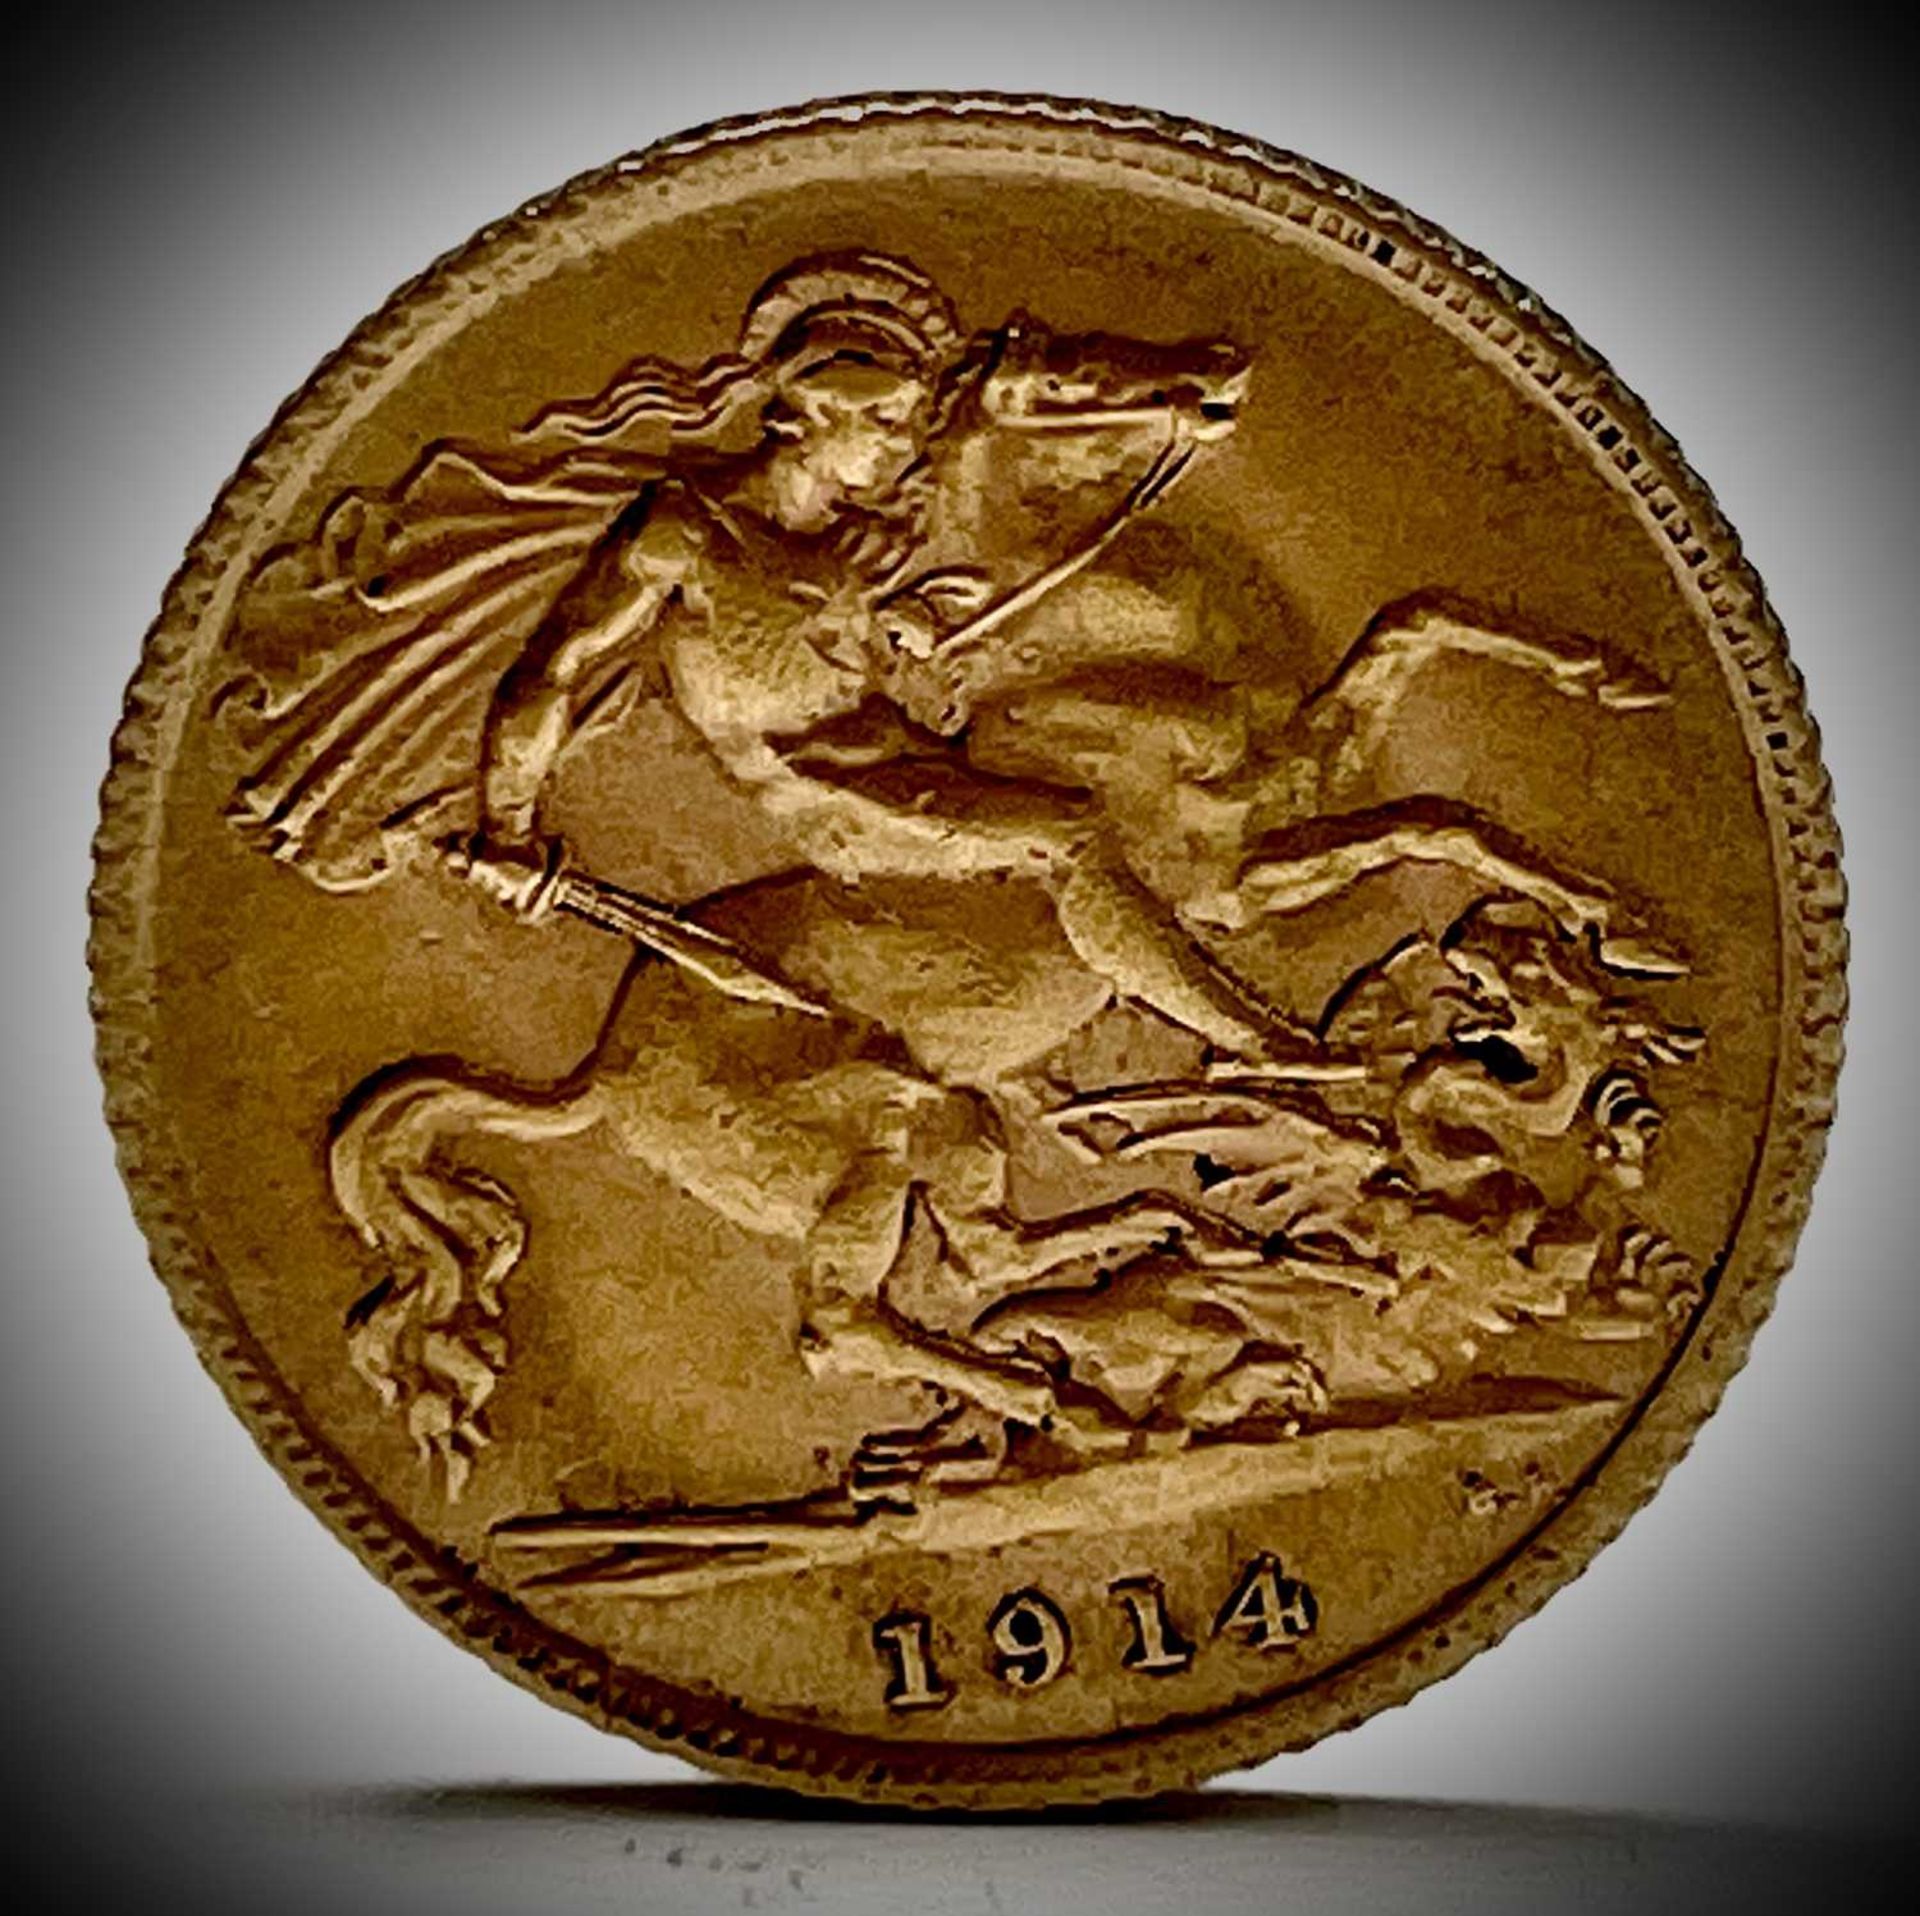 Great Britain Gold Half Sovereign 1914 King George V Condition: please request a condition report if